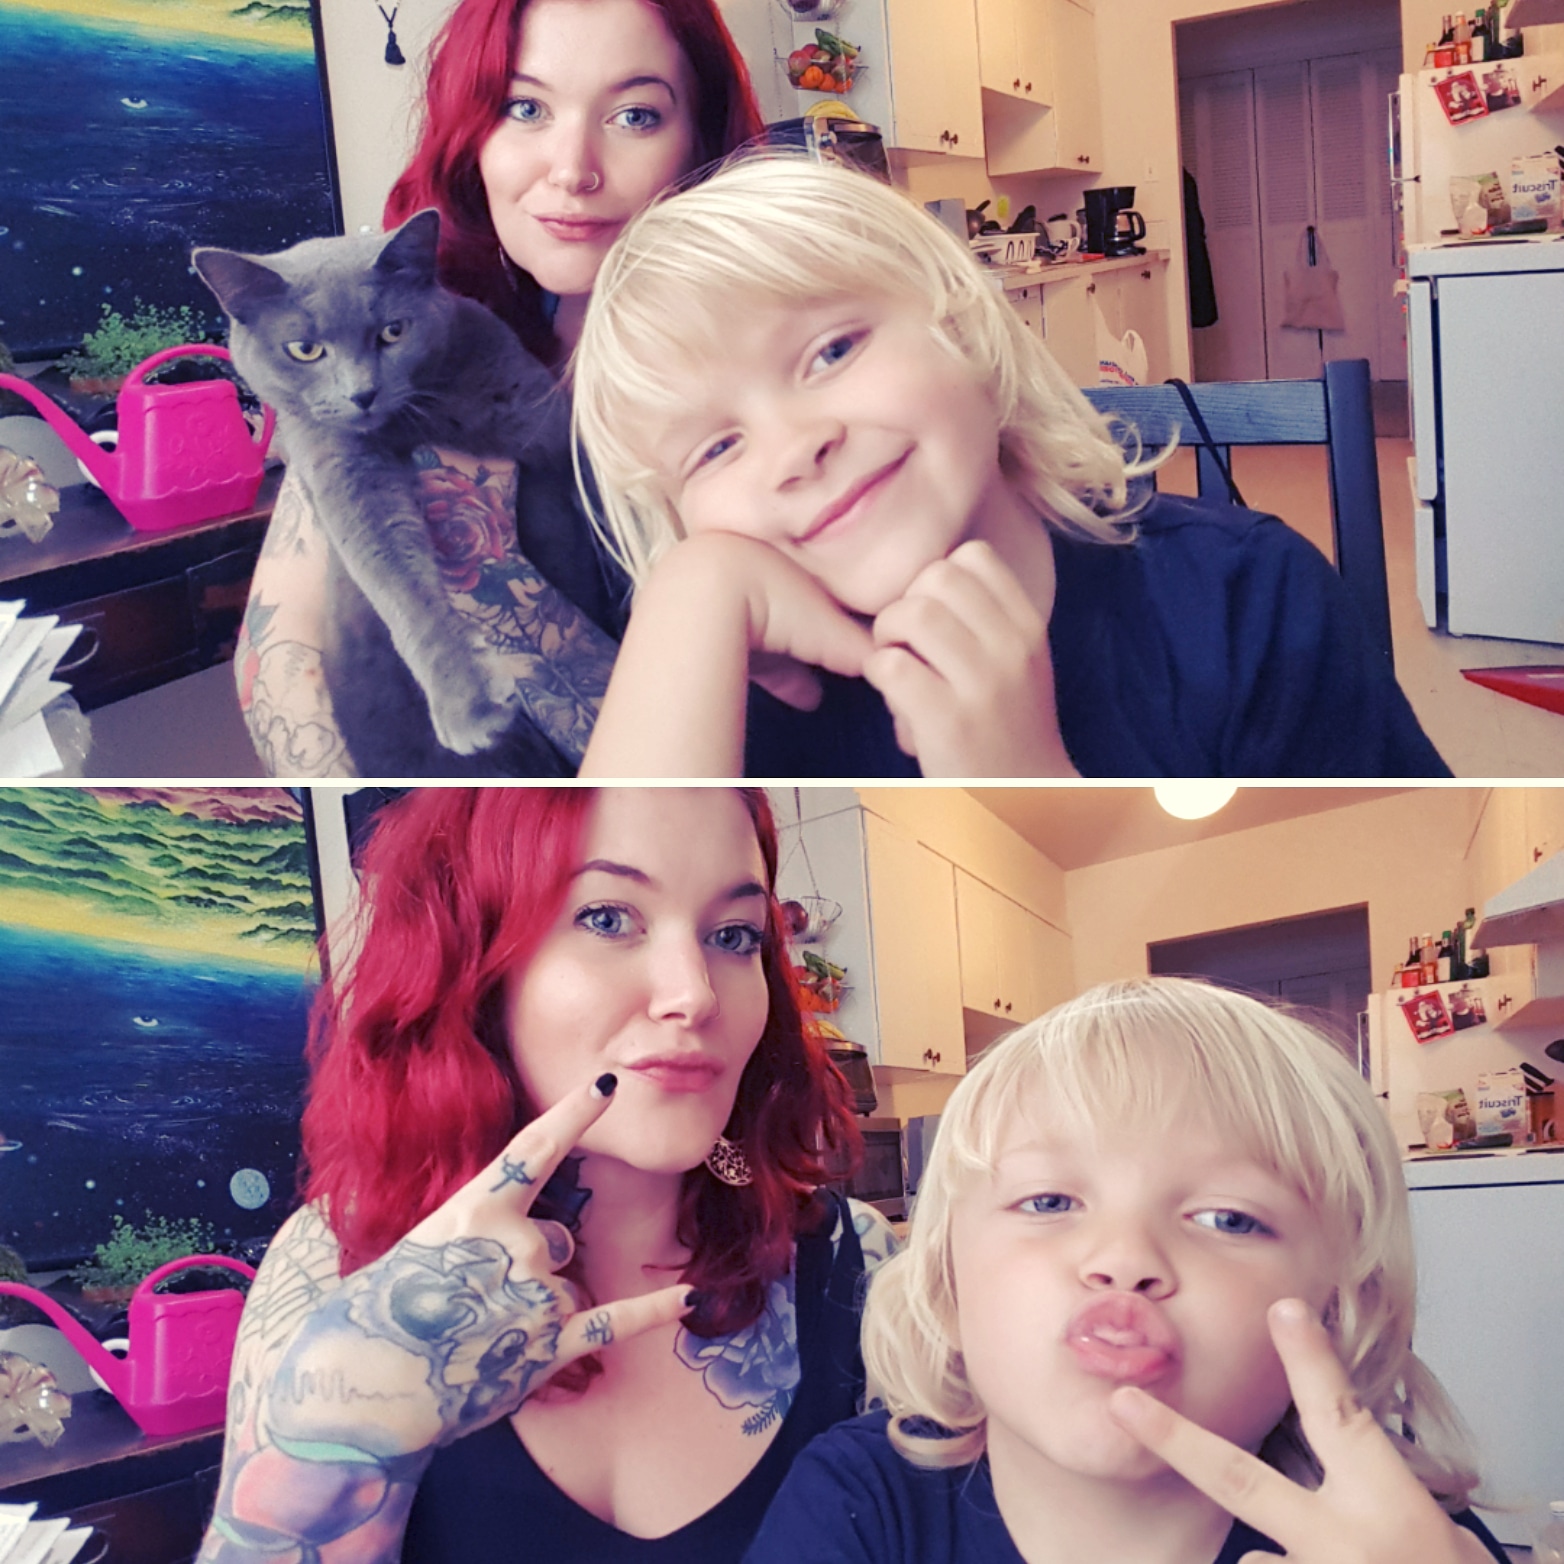 the author and her son taking silly selfies